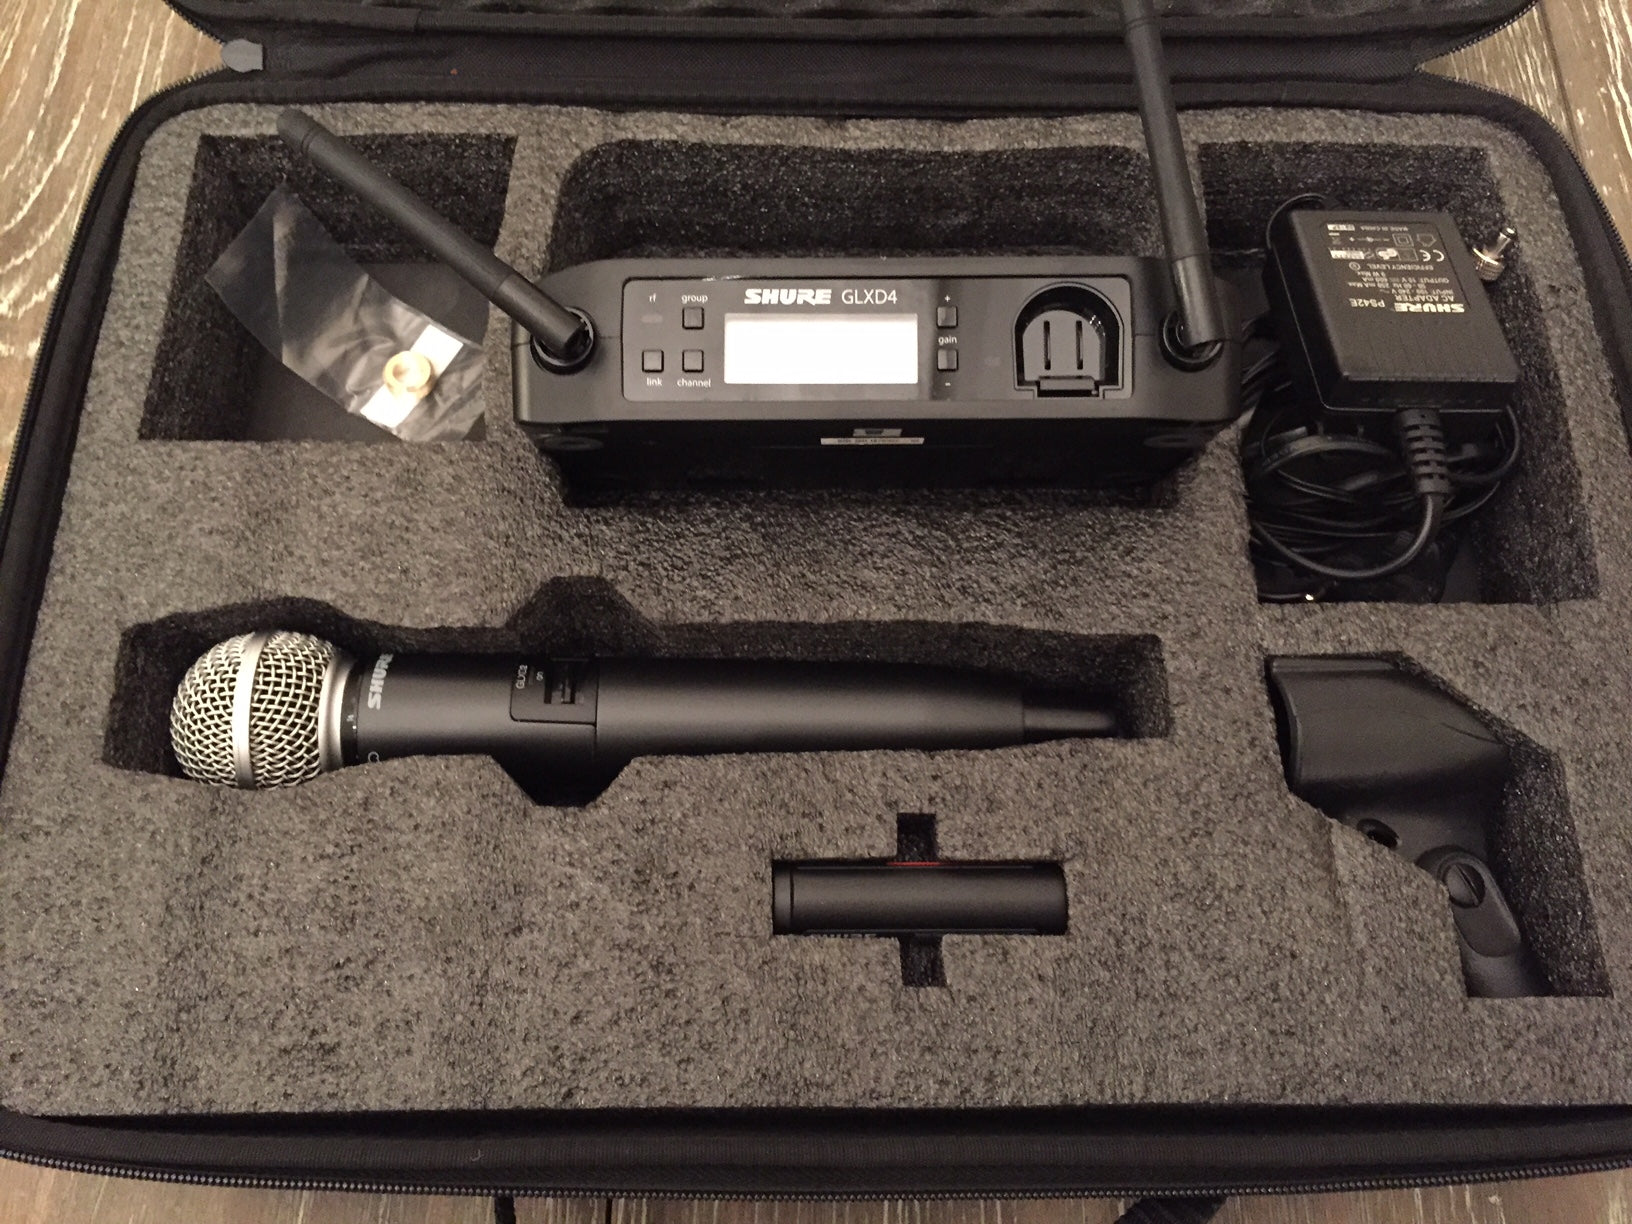 Shure GLXD24/SM58-Z2 Digital Wireless Handheld Microphone System Transmitter Lithium-ion Battery Accessories 2.4 GHz | Open Box - Hollywood DJ